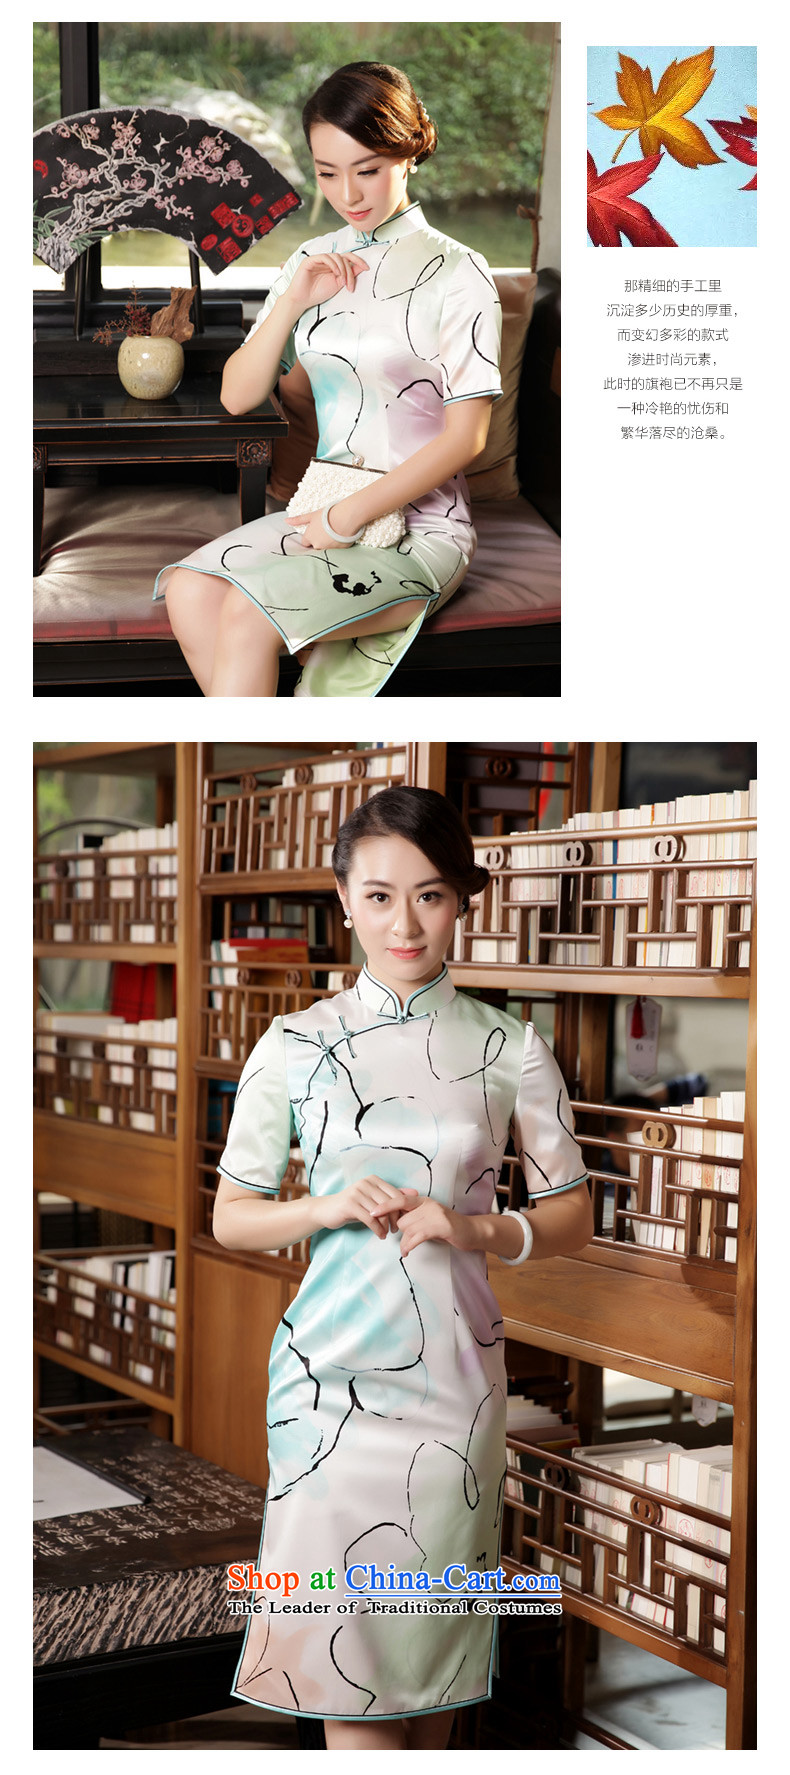 The Wu female red autumn and winter silk cheongsam dress with new daily 